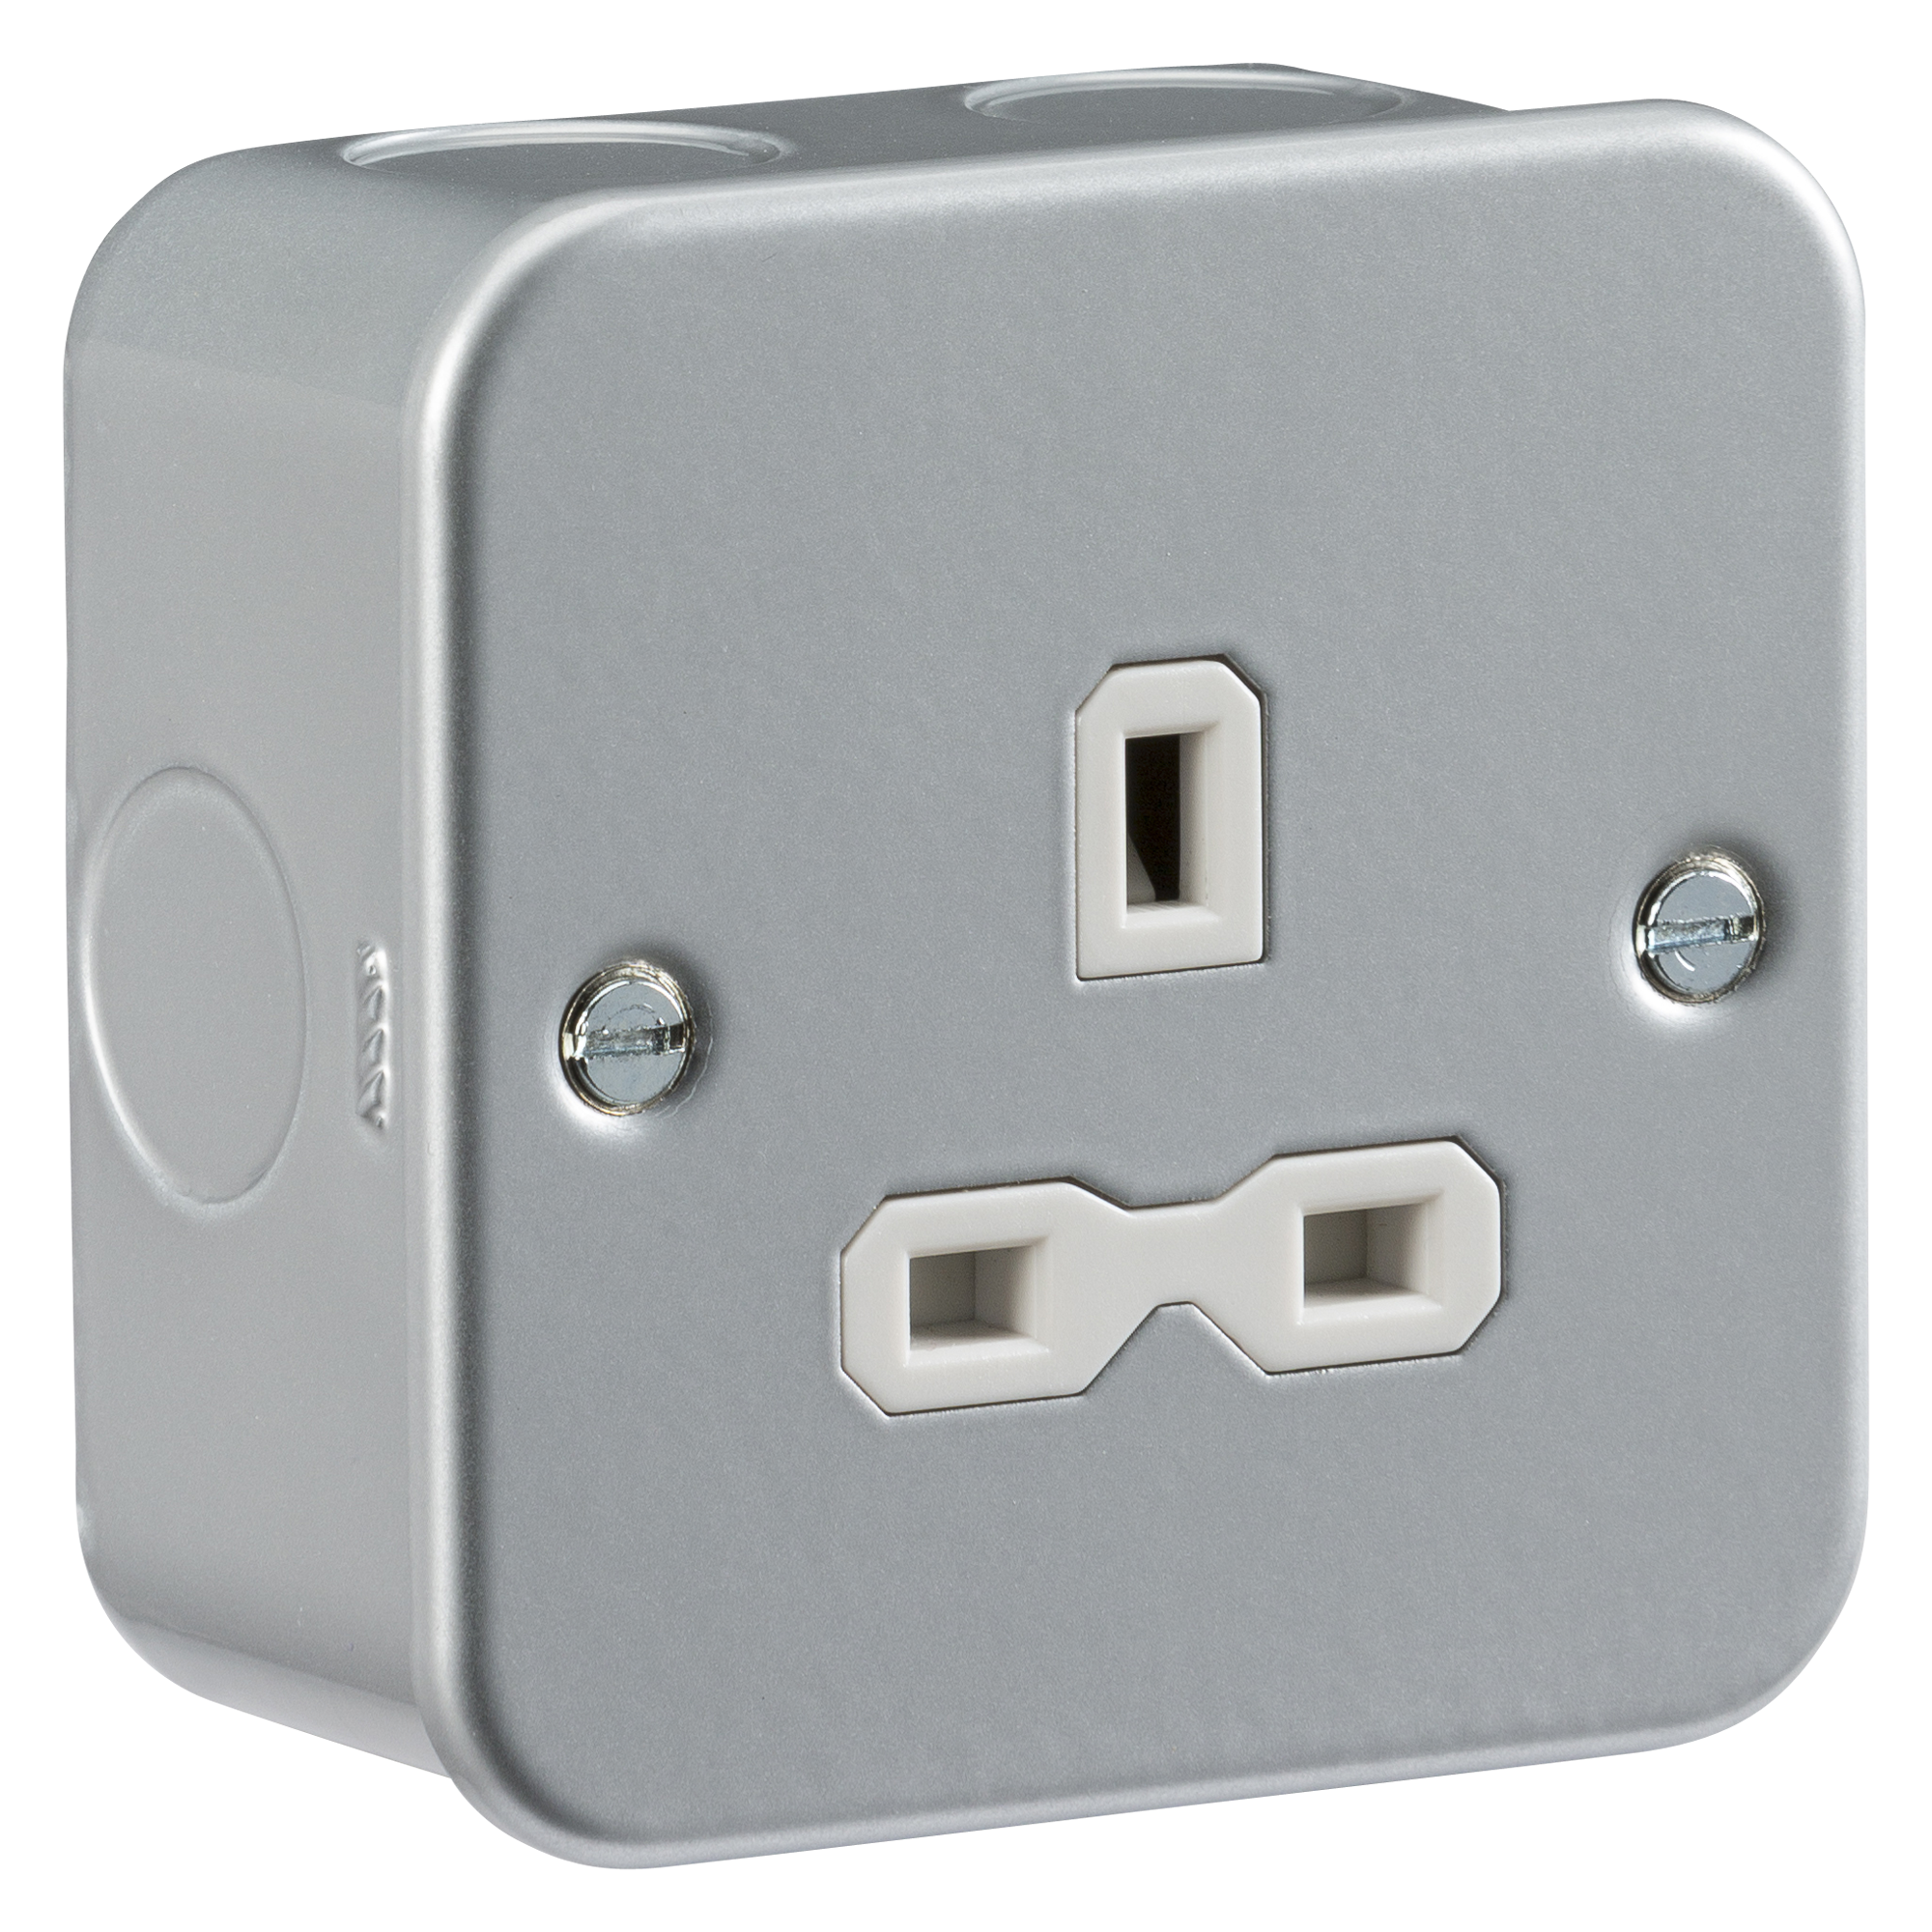 Metal Clad 13A 1G Unswitched Socket - MR7000U 